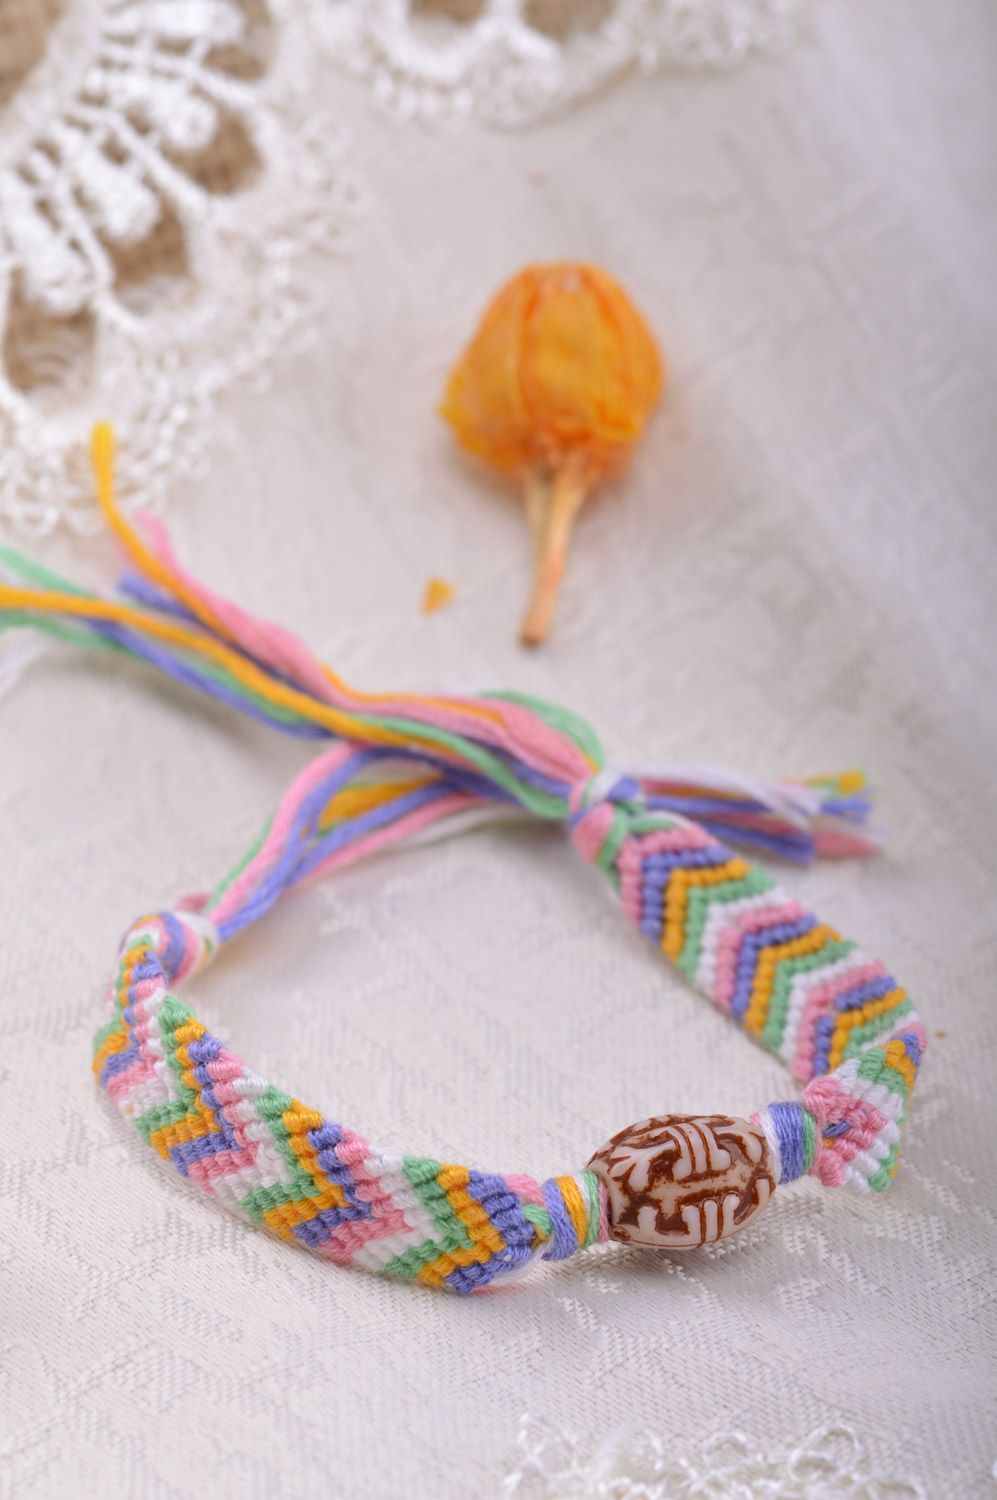 Simple handmade friendship bracelet woven of colorful embroidery floss with beads photo 5